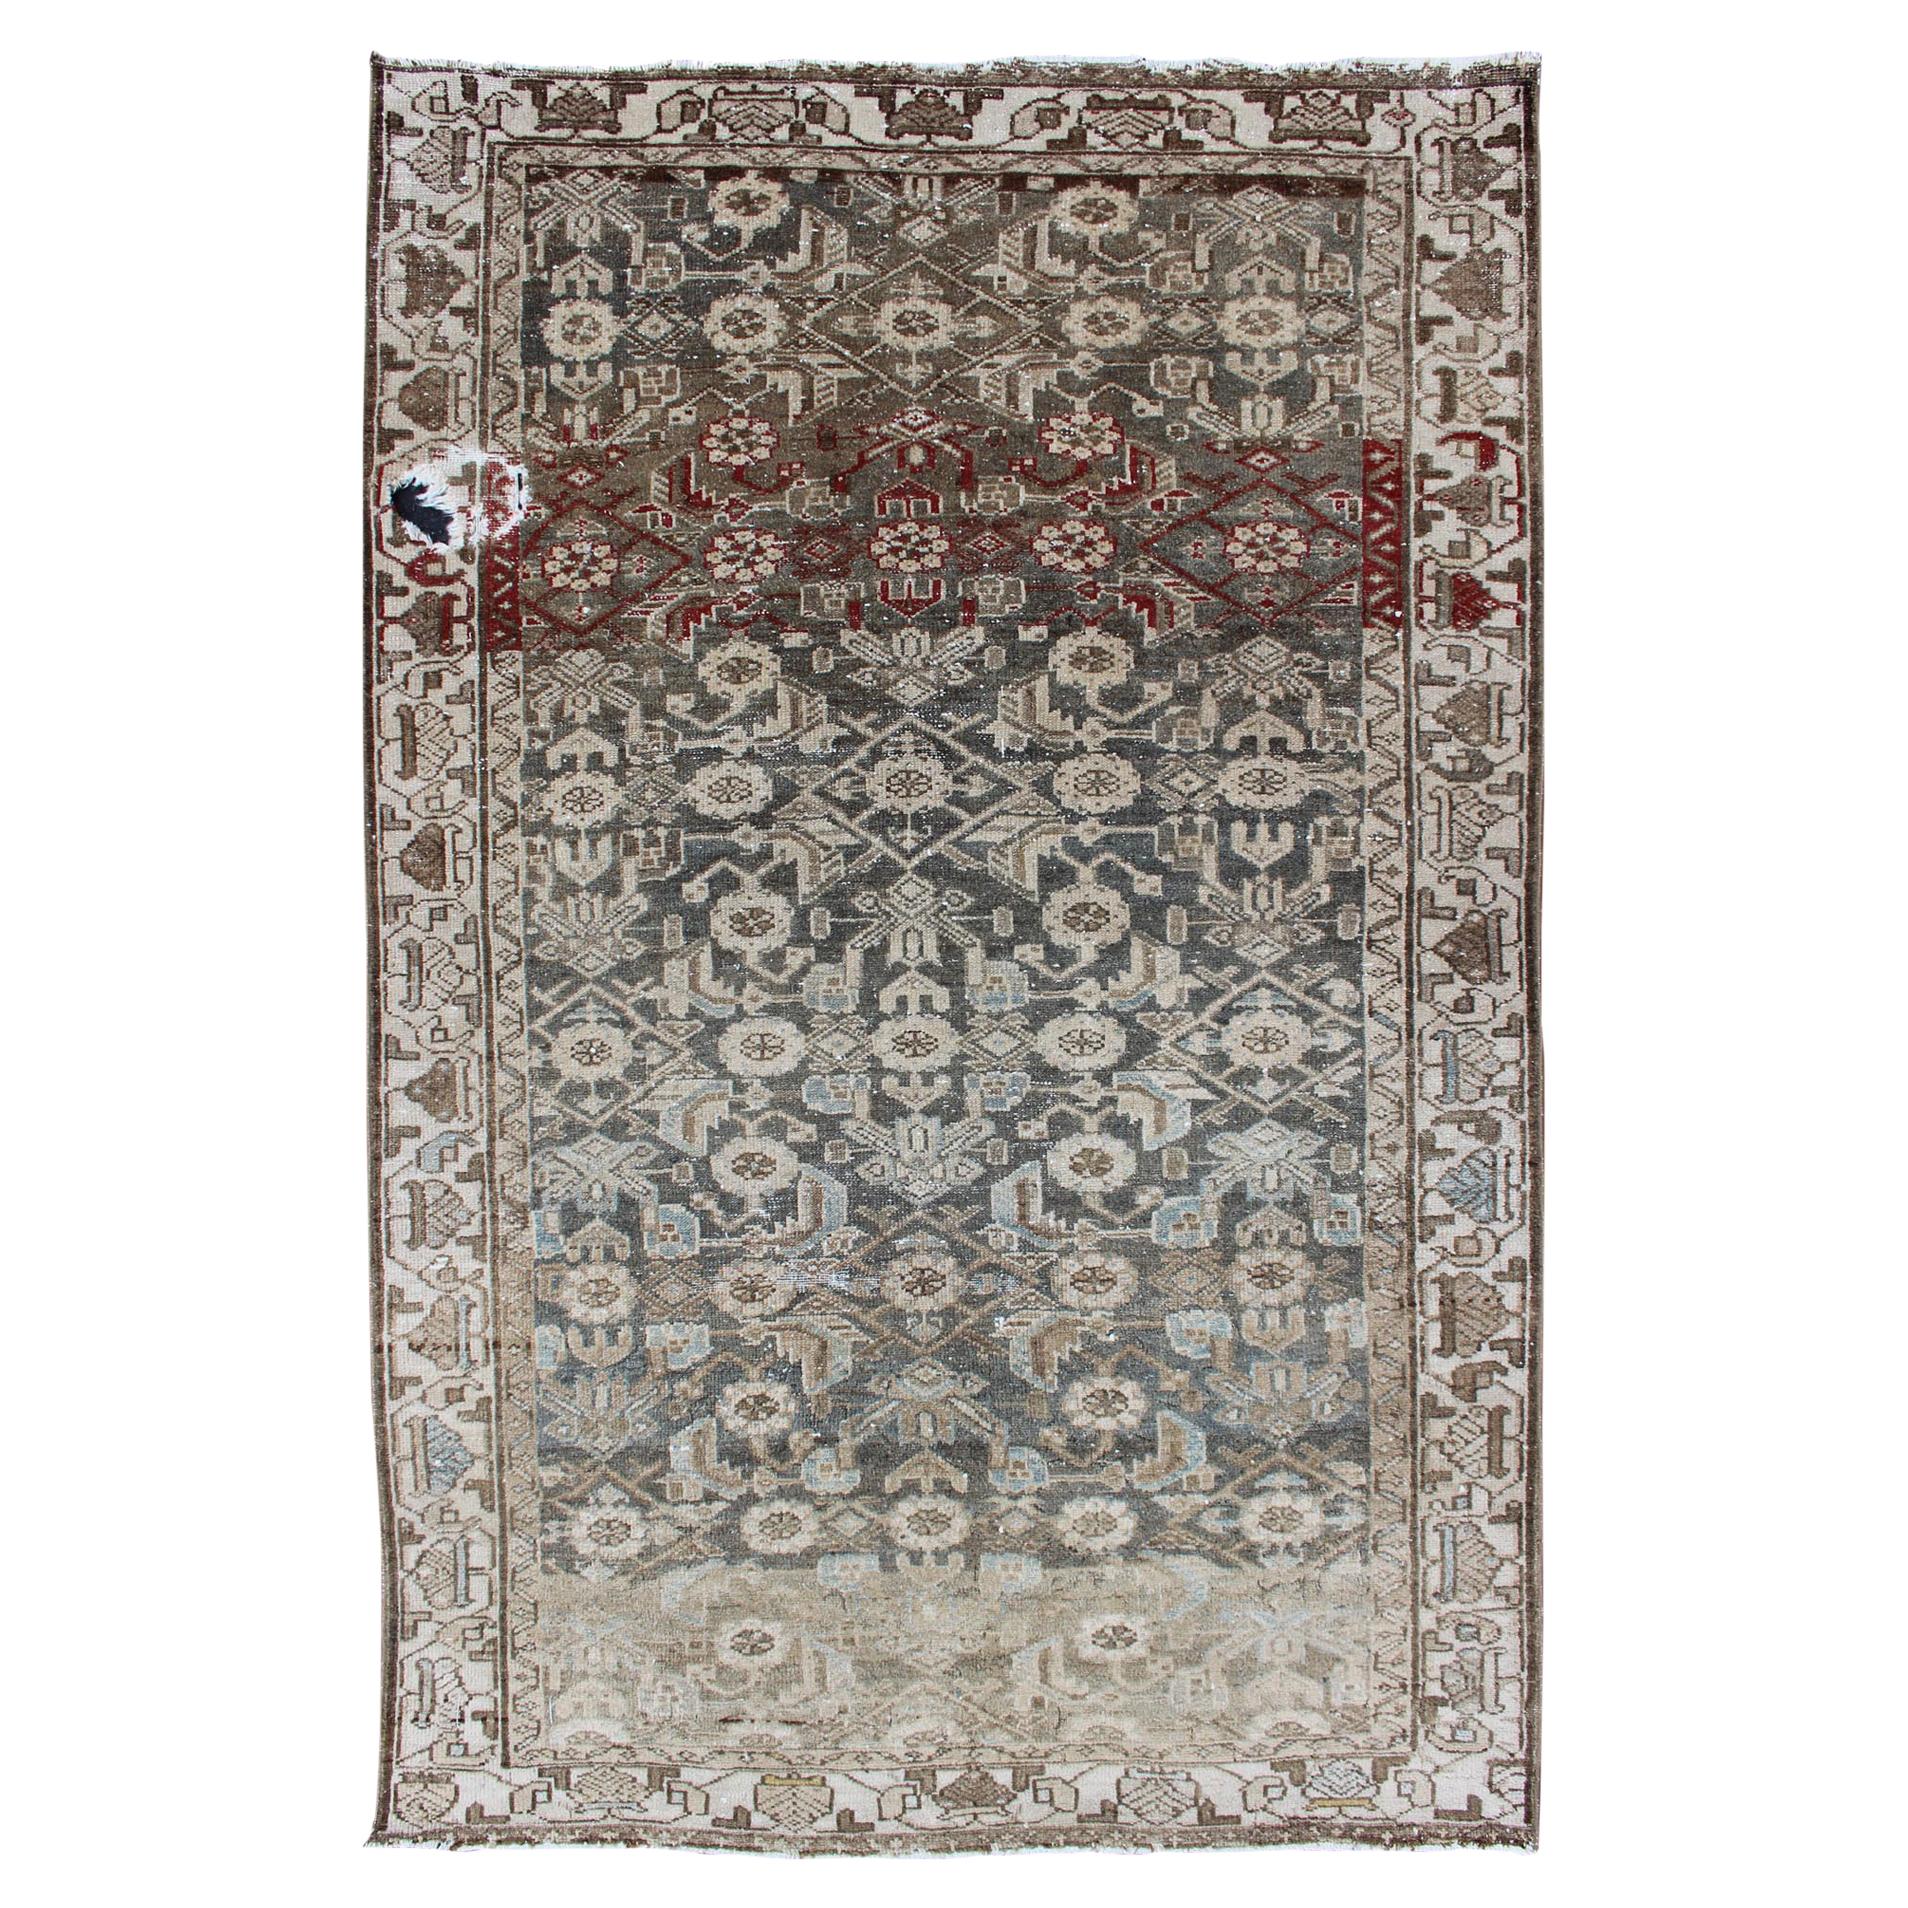 Distressed Antique Persian Hamadan Rug with All-Over Pattern and Gray Blue